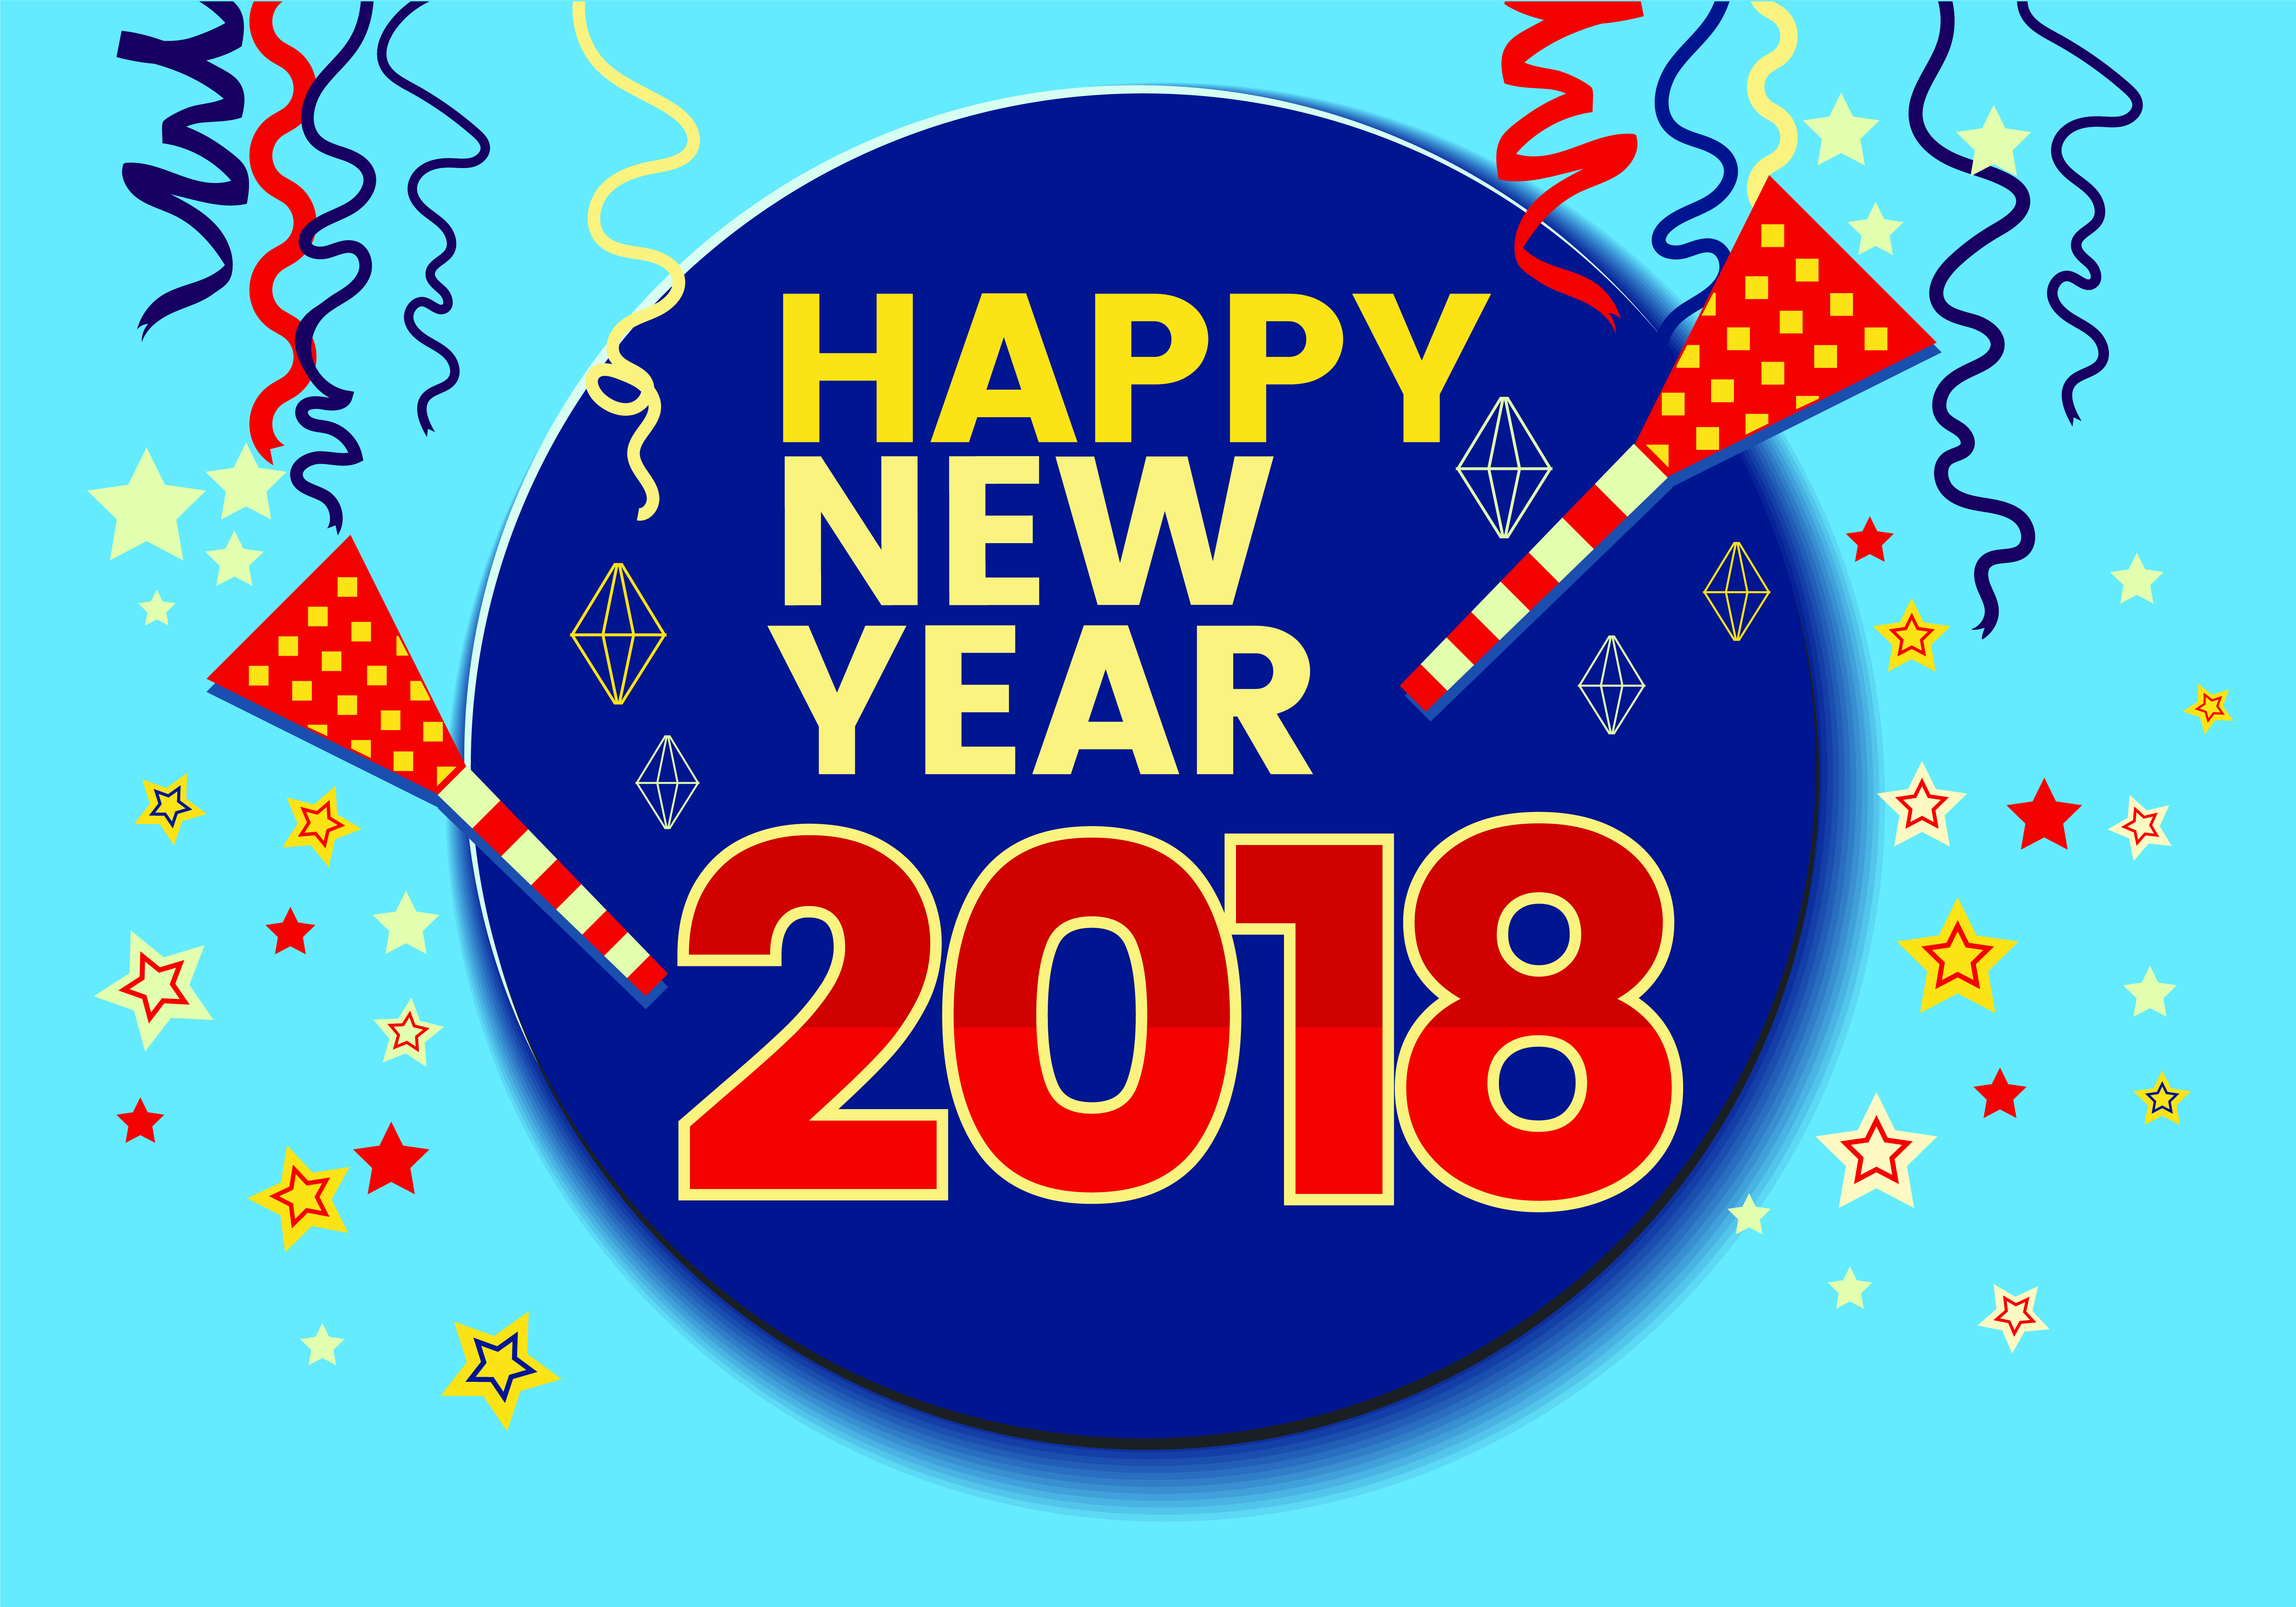 New Year, 2018 Wallpaper, Hd New Years Wallpapers, Happy New Year Wallpapers, Happy New Year 2018, Santa Wallpaper